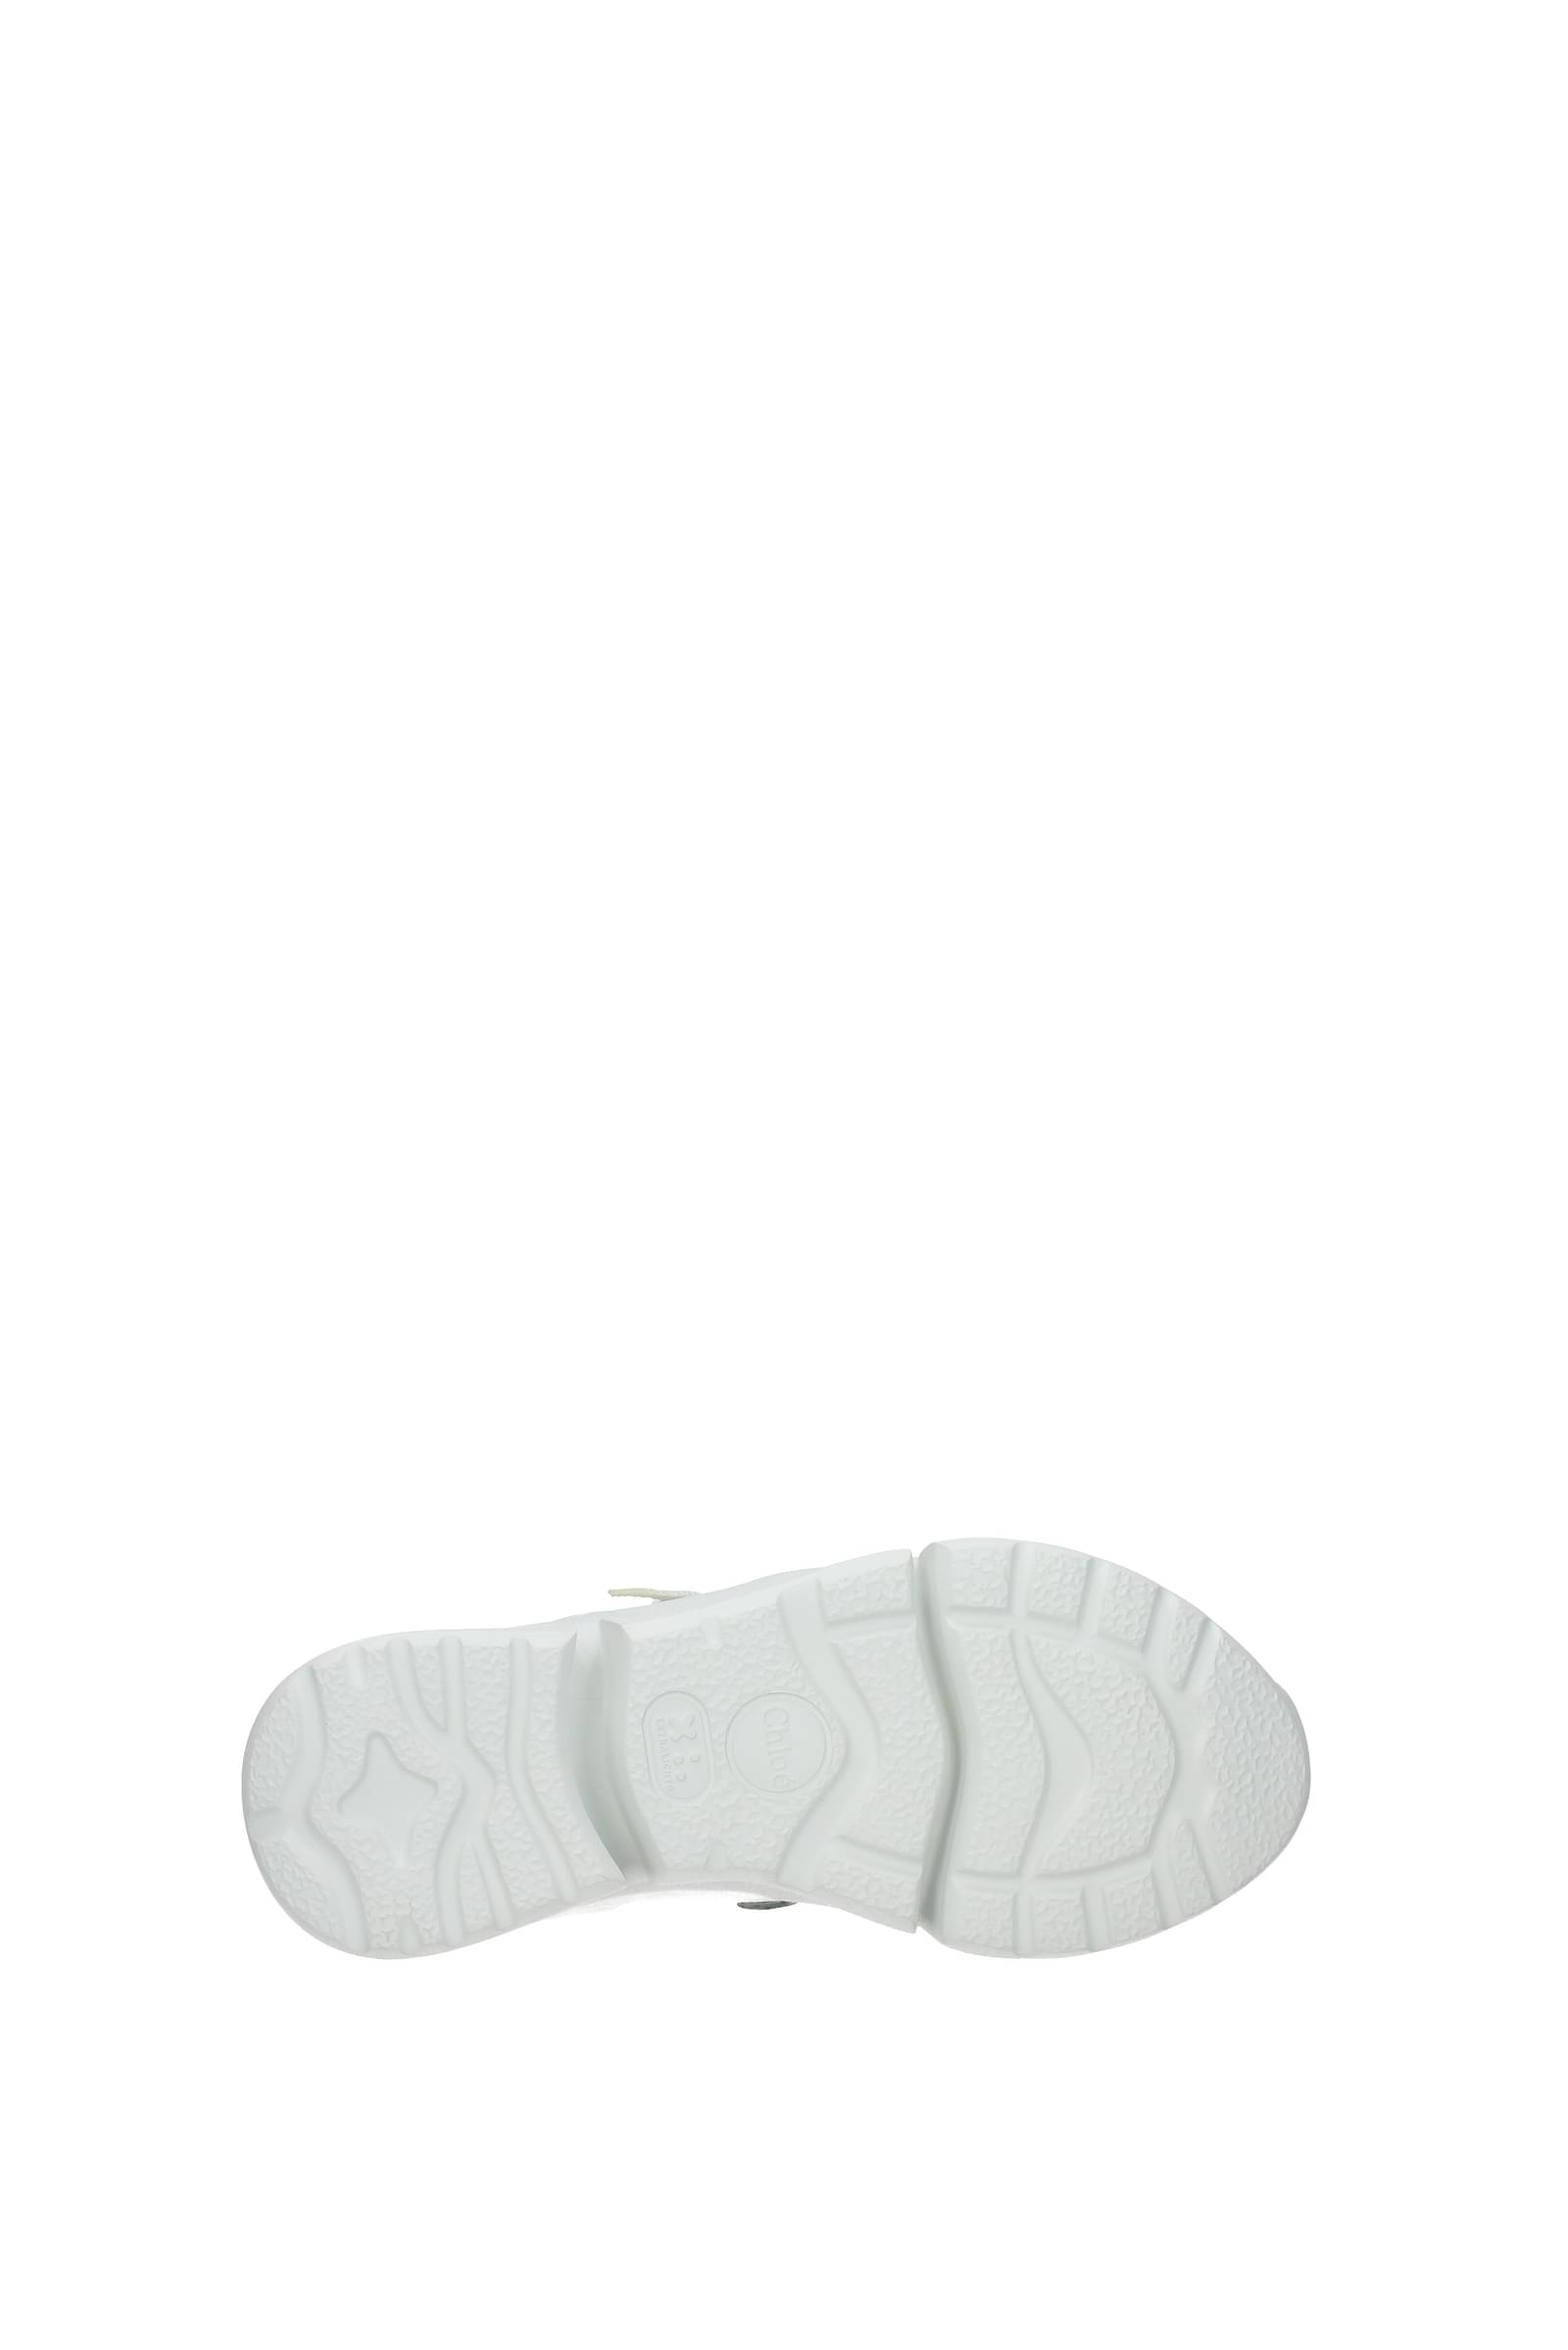 Chloé Sneakers Women Leather White